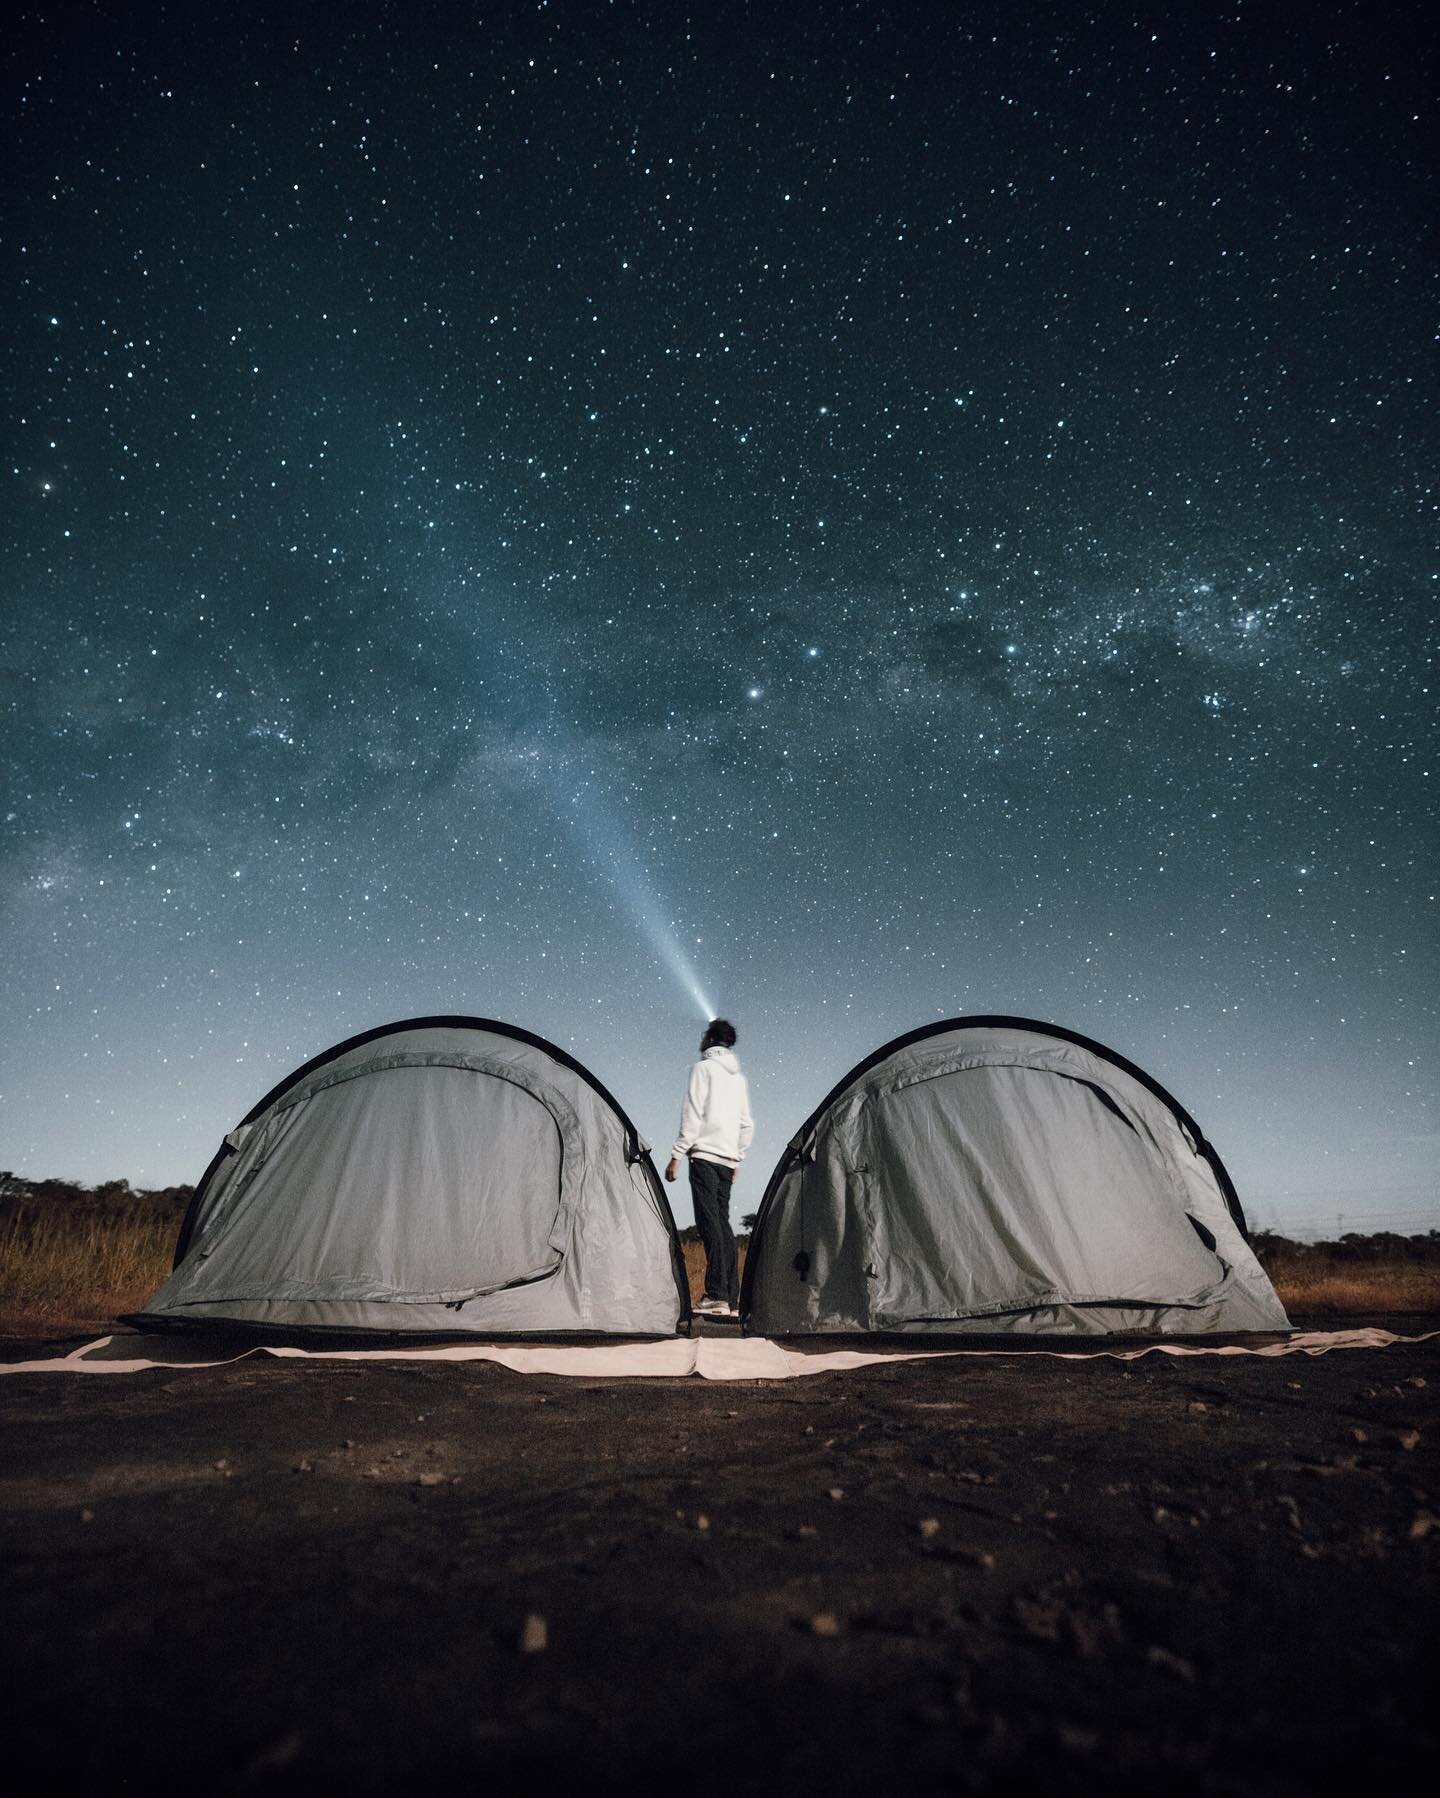 Been doing a whole lot of stargazing in Angola as my nighttime routine 😎
It&rsquo;s been amazing camping in those remote places with no one else around.

Edited with @care4art.co

#hellofrom #angola #africa